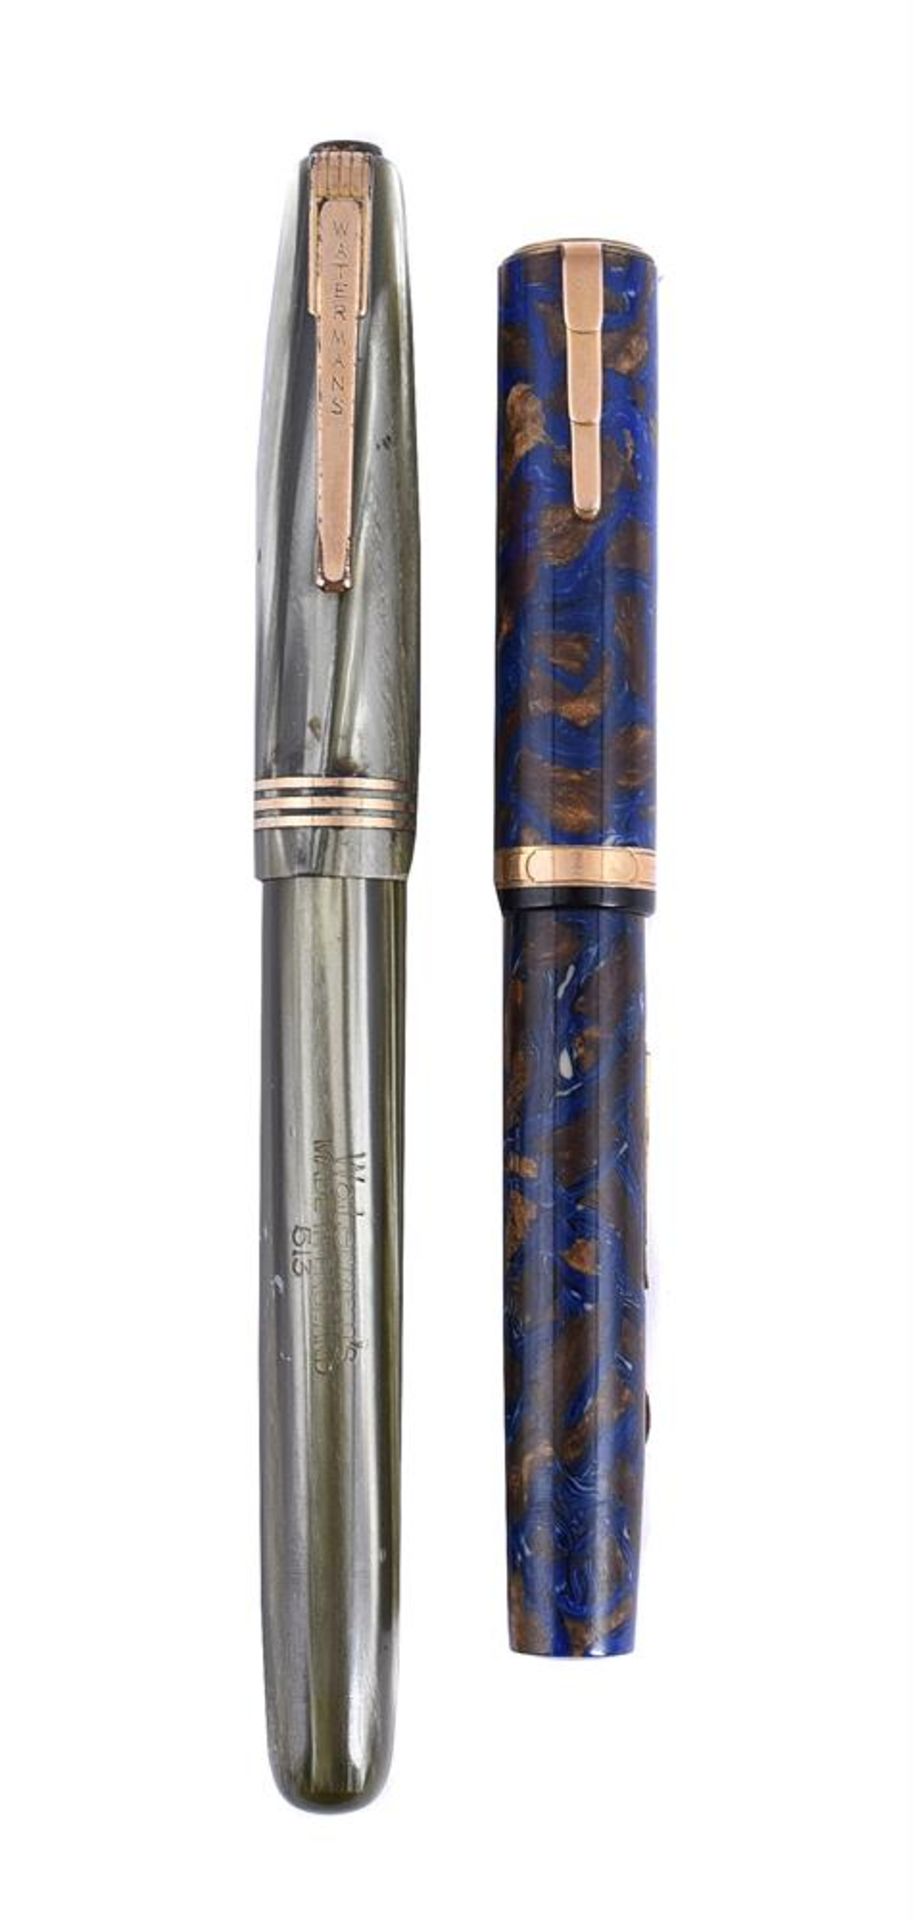 WATERMAN'S, LADY PATRICIA, A BLUE AND BRONZE MOTTLED FOUNTAIN PEN